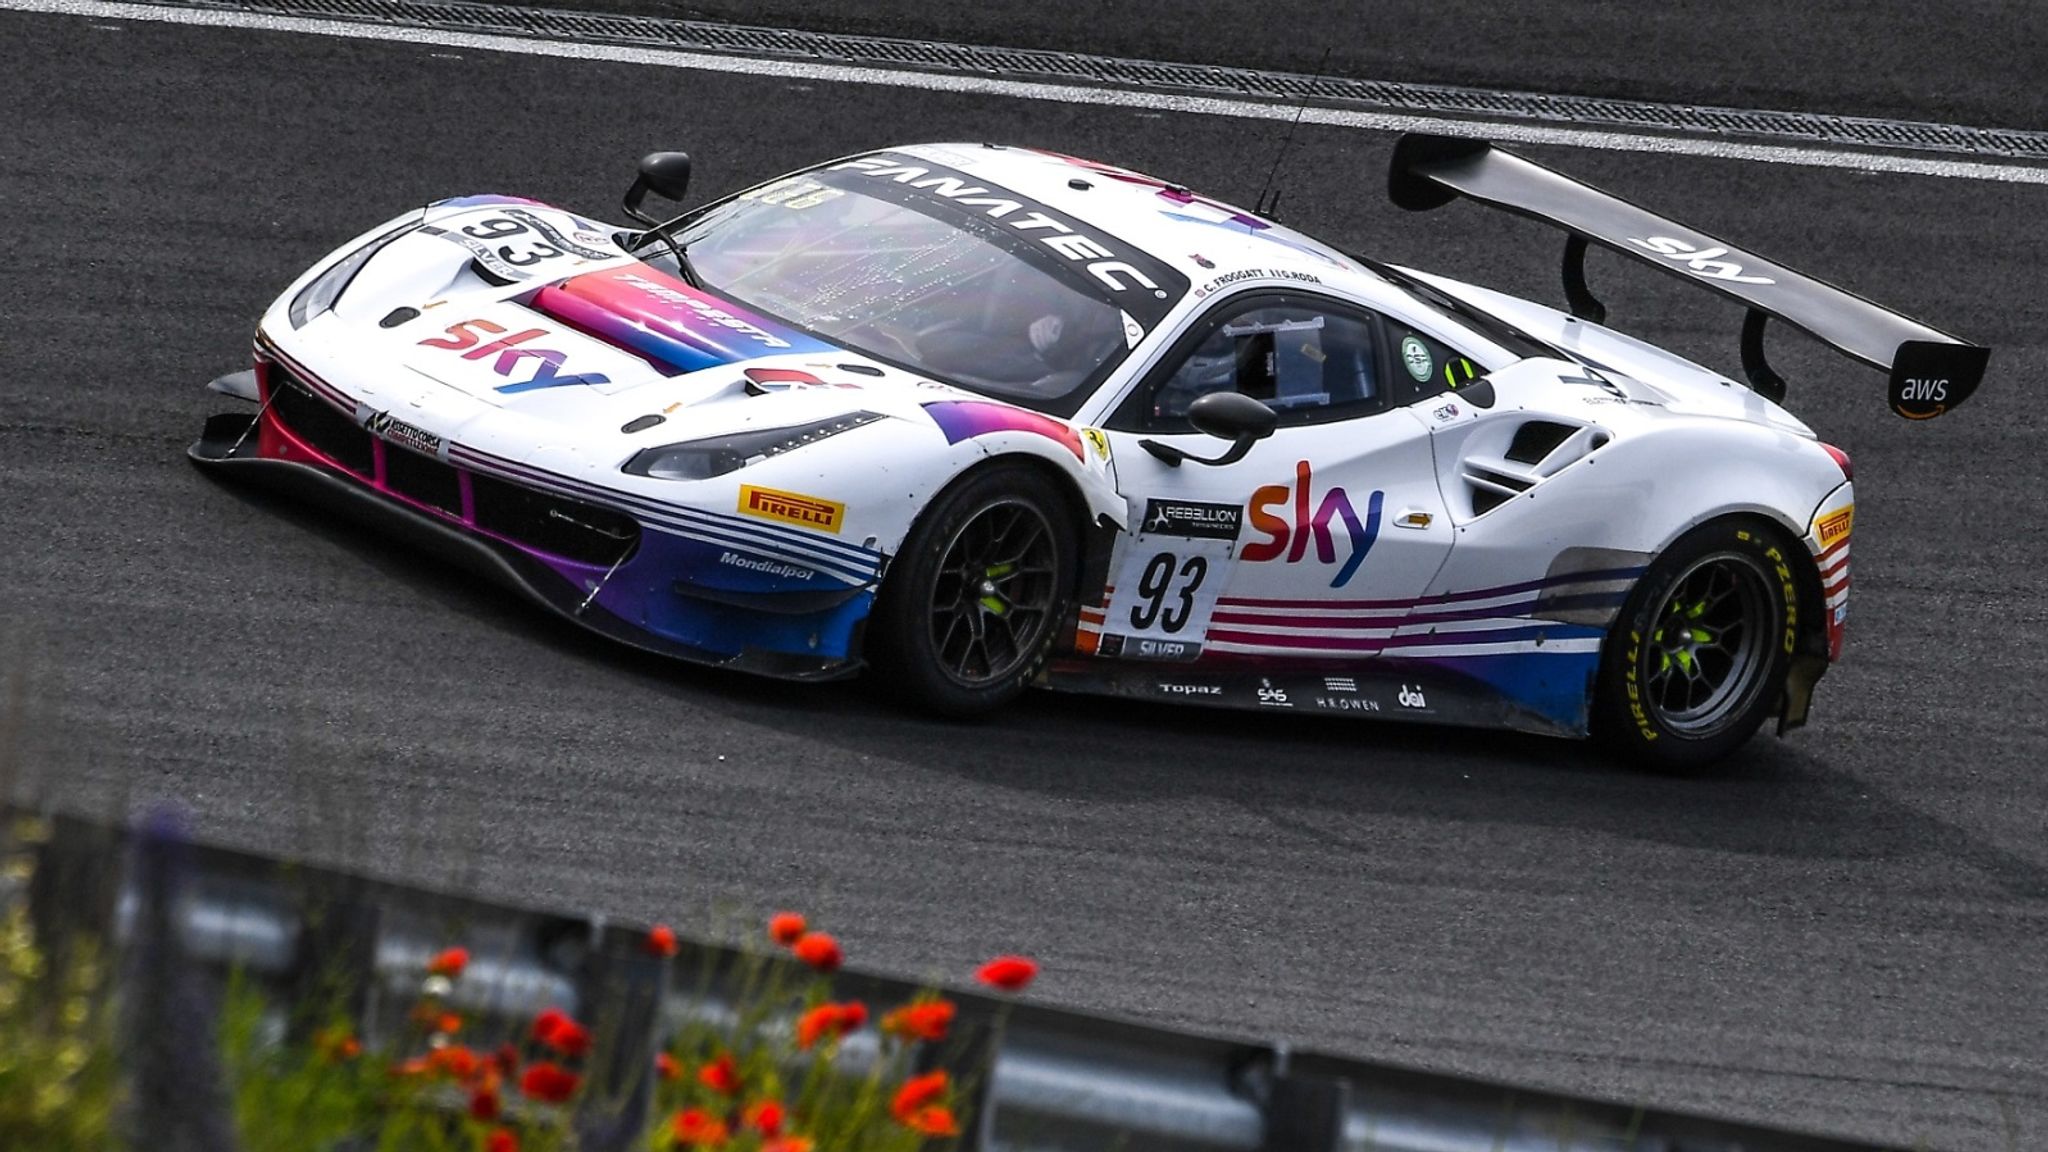 Energize Atlantic Medicinsk Sky Tempesta Racing go for glory in Spa 24 Hours at GT World Challenge  Europe's showpiece | F1 News